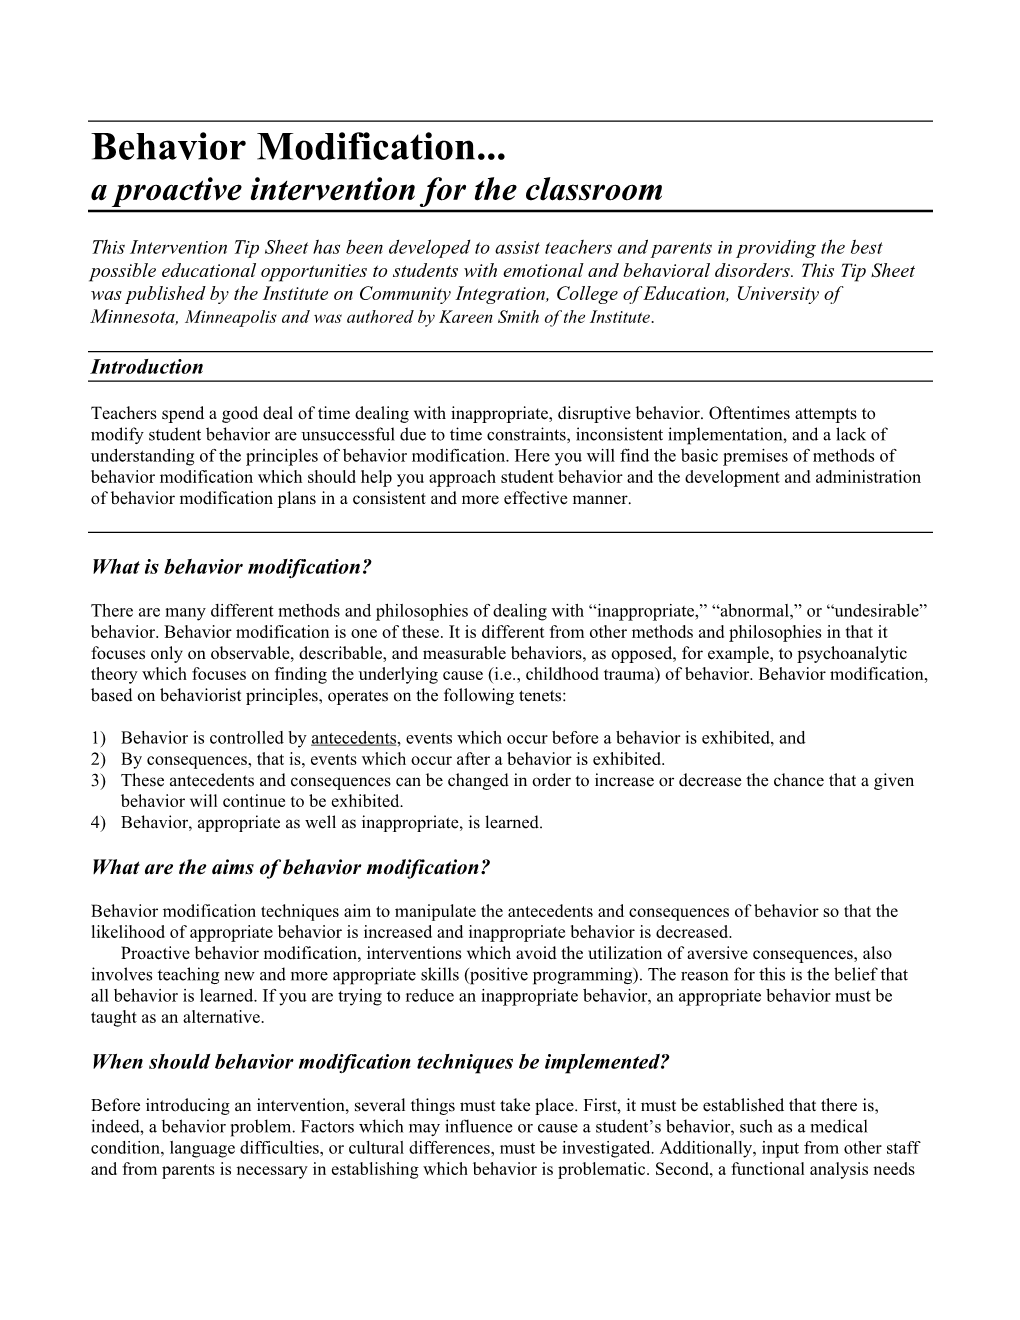 Behavior Modification... a Proactive Intervention for the Classroom